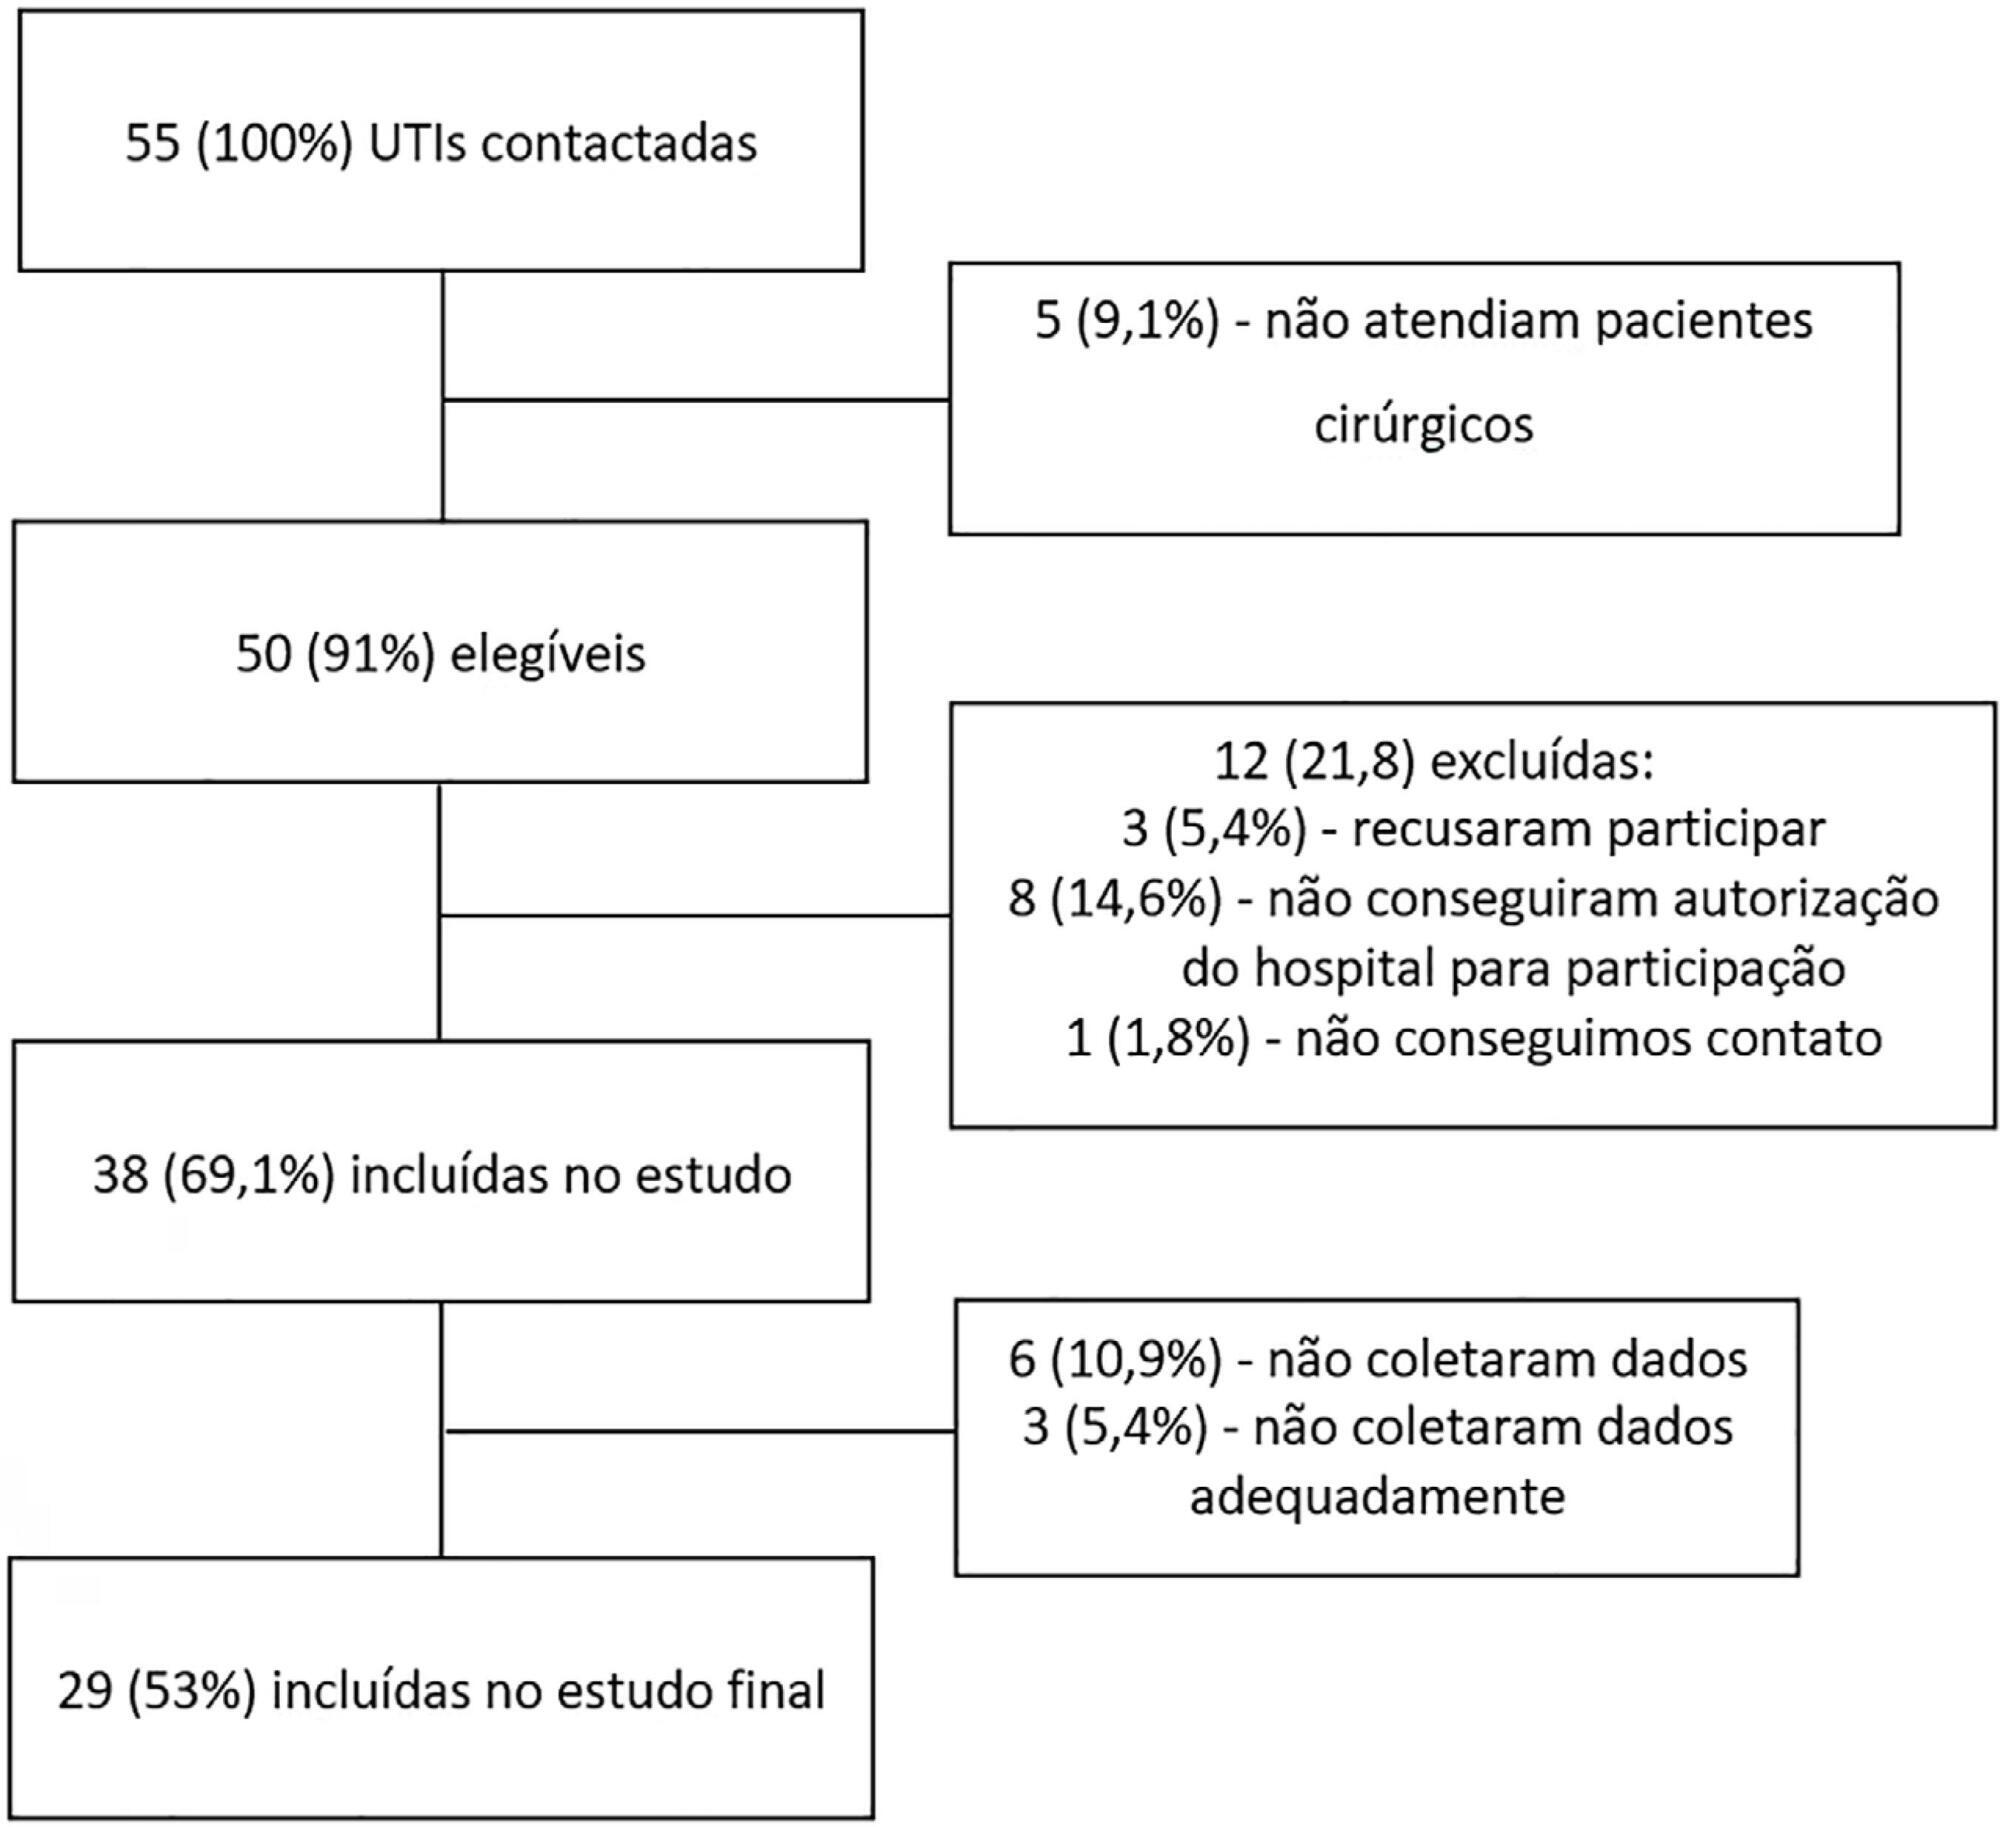 Epidemiology and outcome of high-surgical-risk patients admitted to an intensive care unit in Brazil